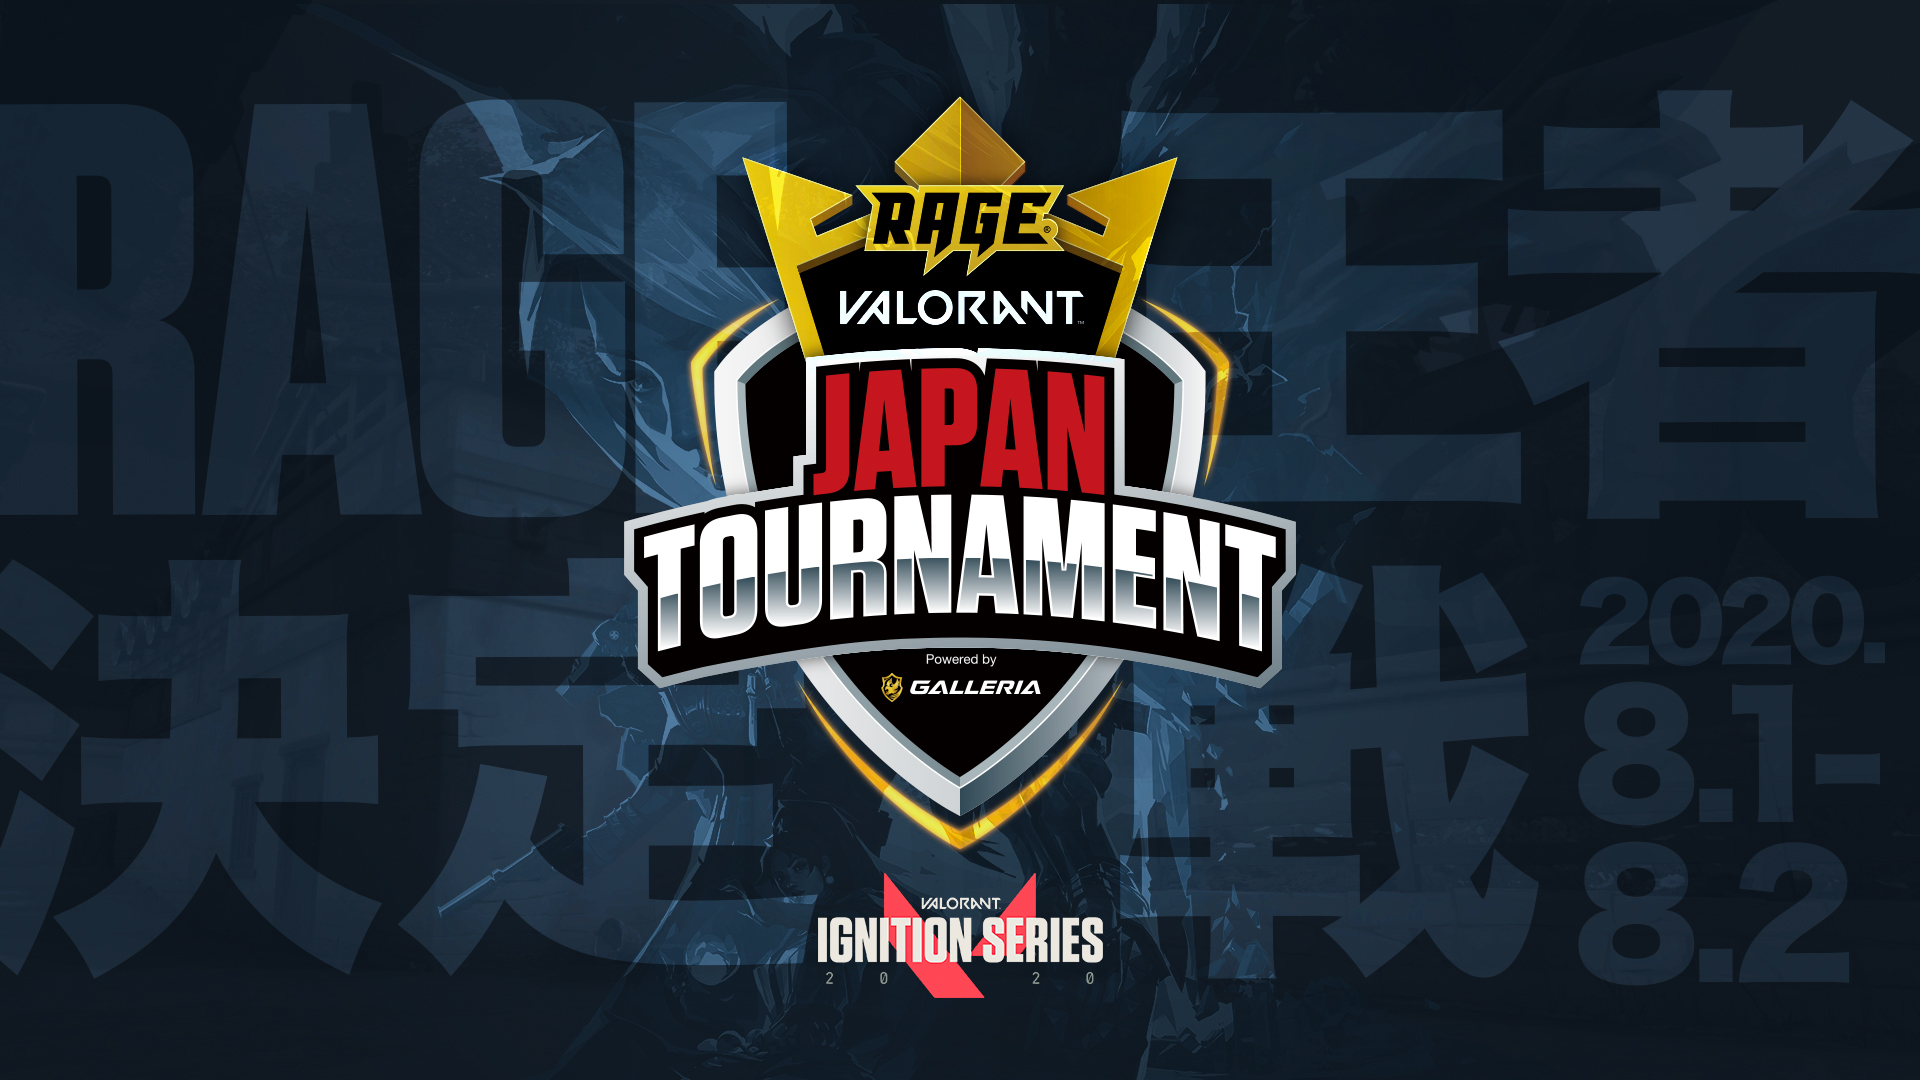 RAGE VALORANT JAPAN TOURNAMENT Powered by GALLERIA